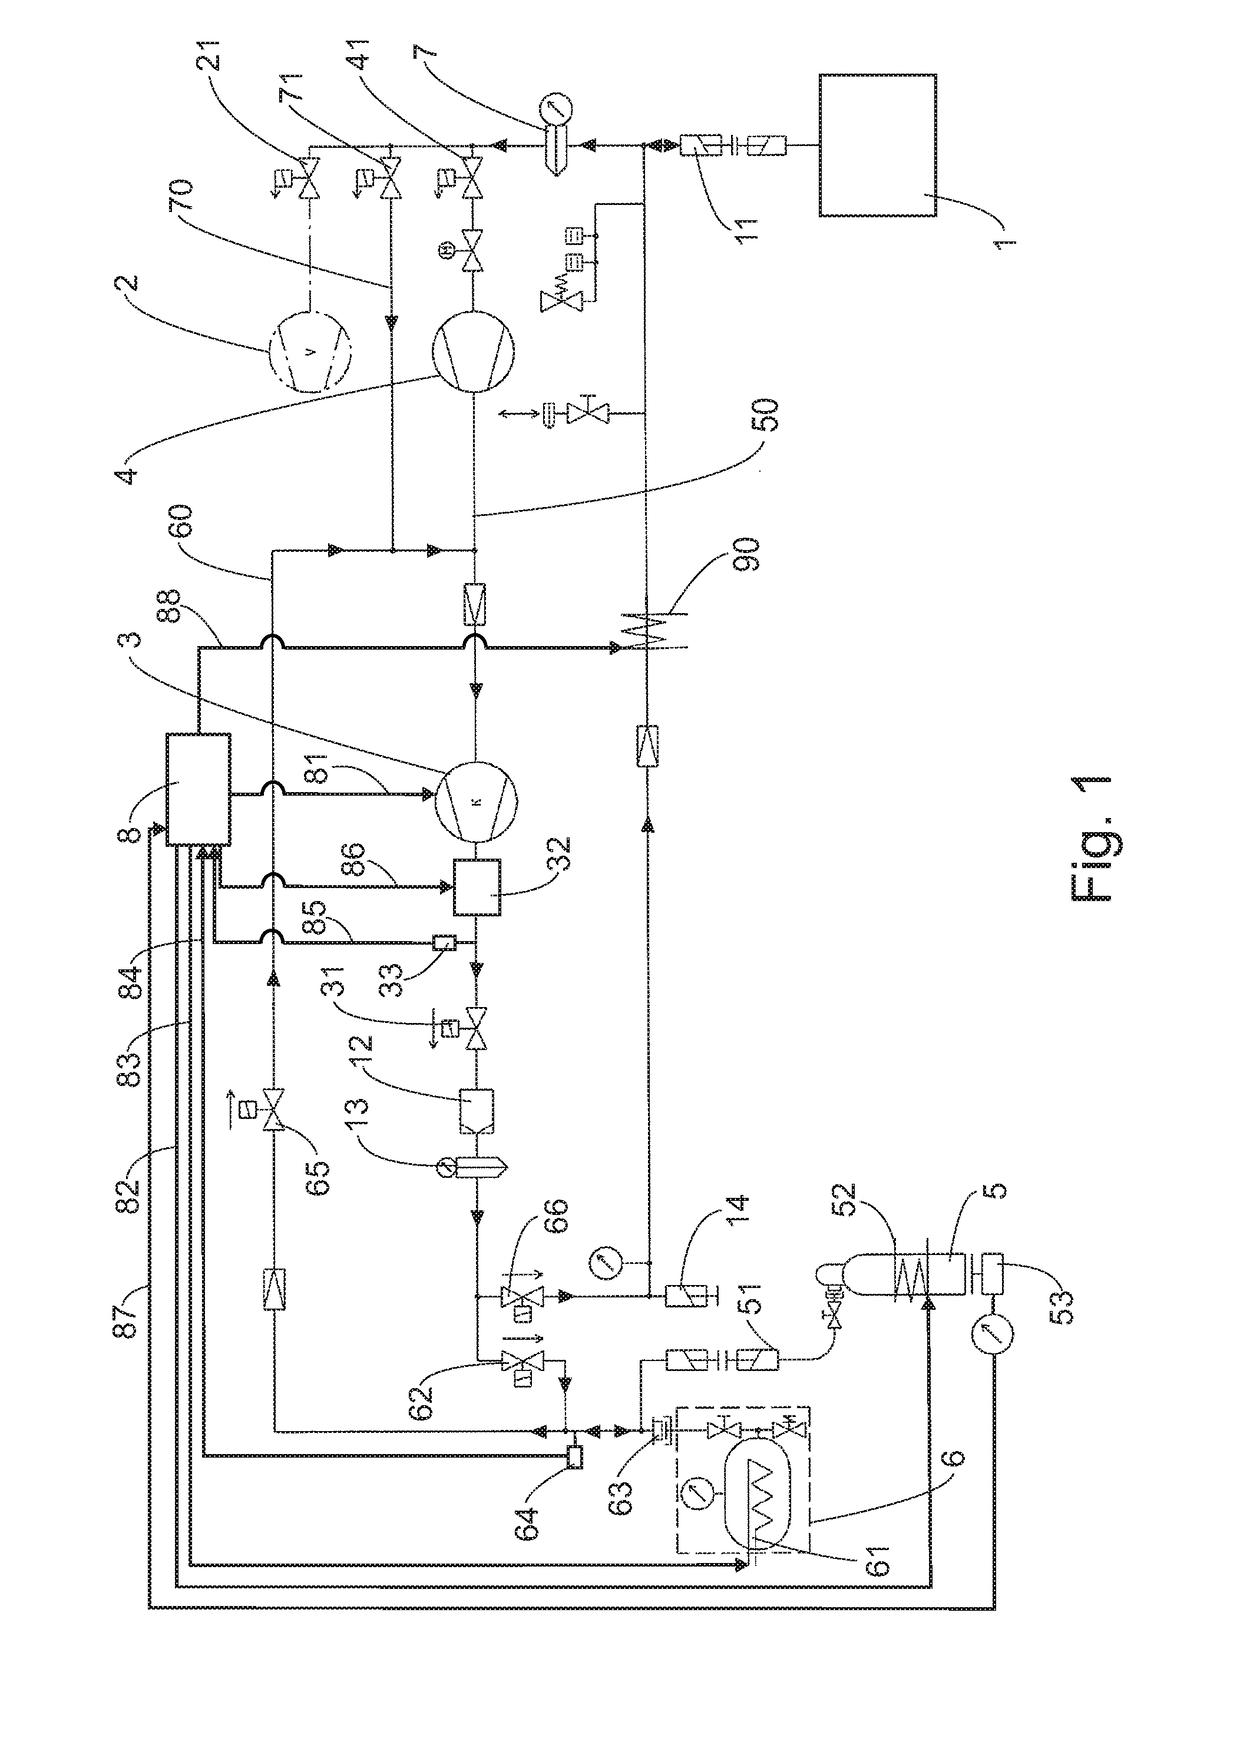 Service device and method for using a multi-component insulating gas during maintenance of electrical switchgear systems